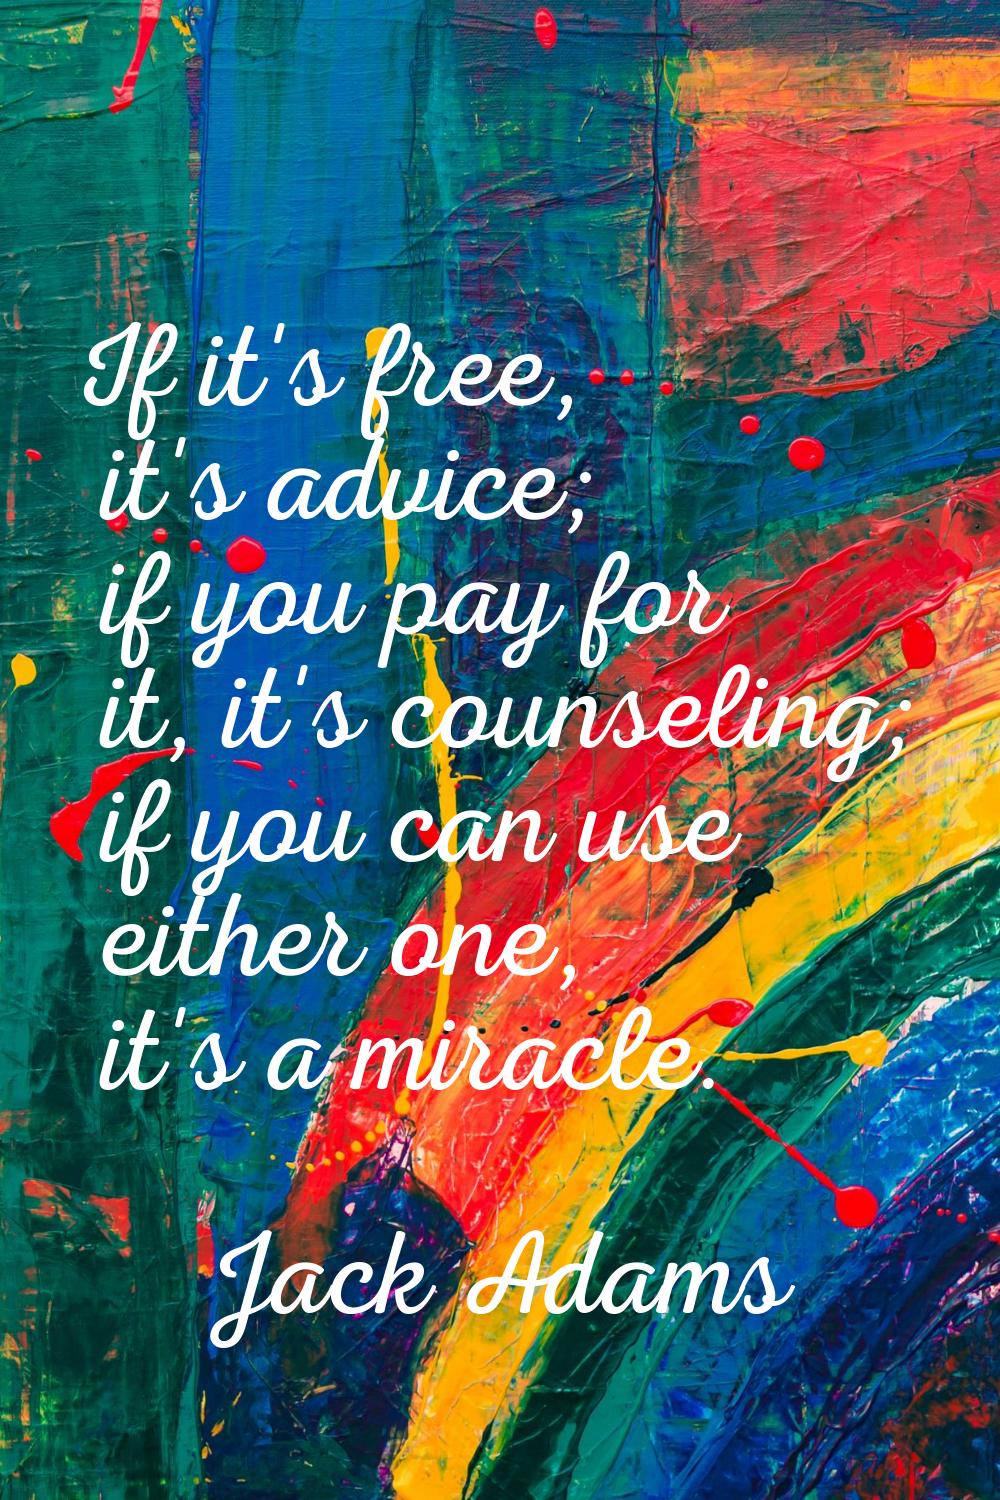 If it's free, it's advice; if you pay for it, it's counseling; if you can use either one, it's a mi